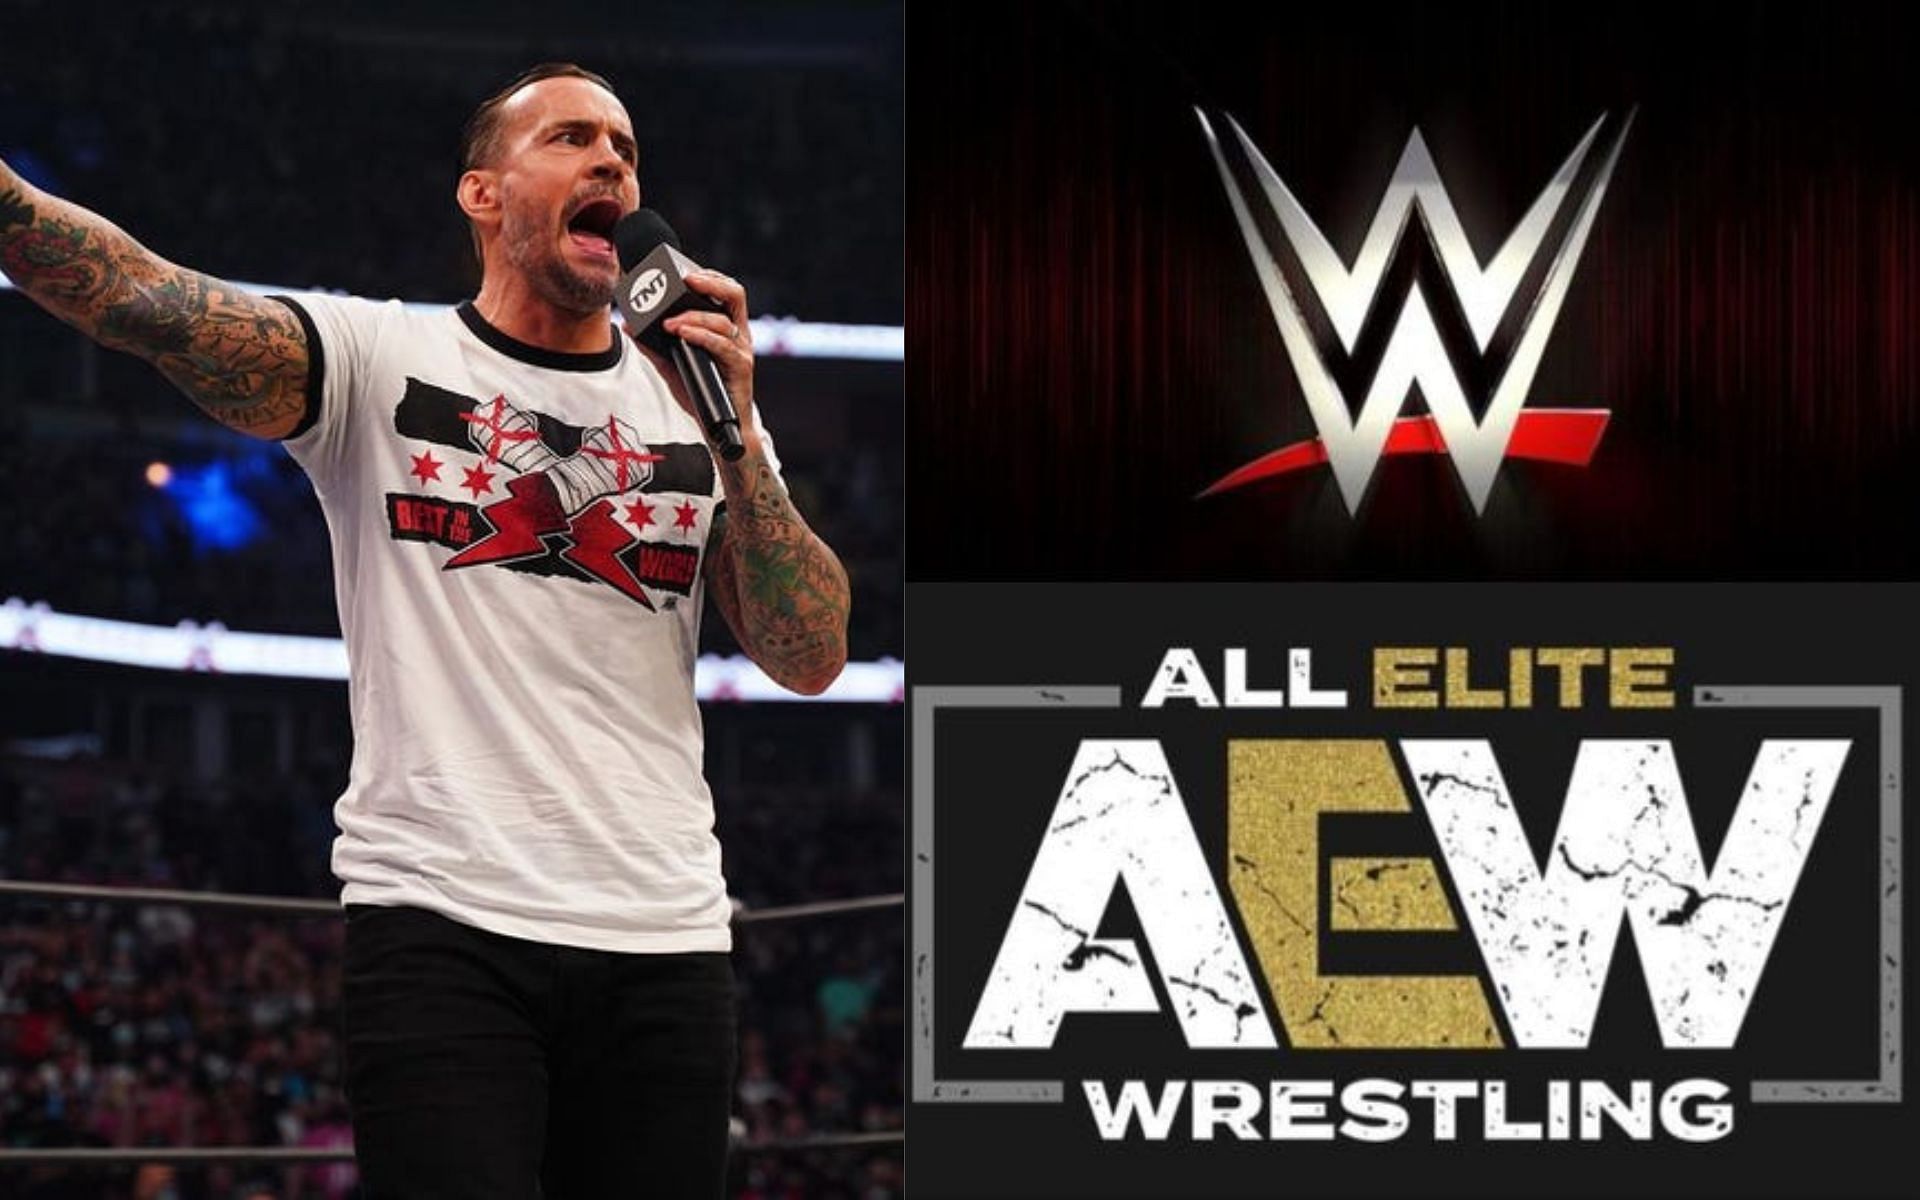 CM Punk (left) and WWE and AEW logos (right).